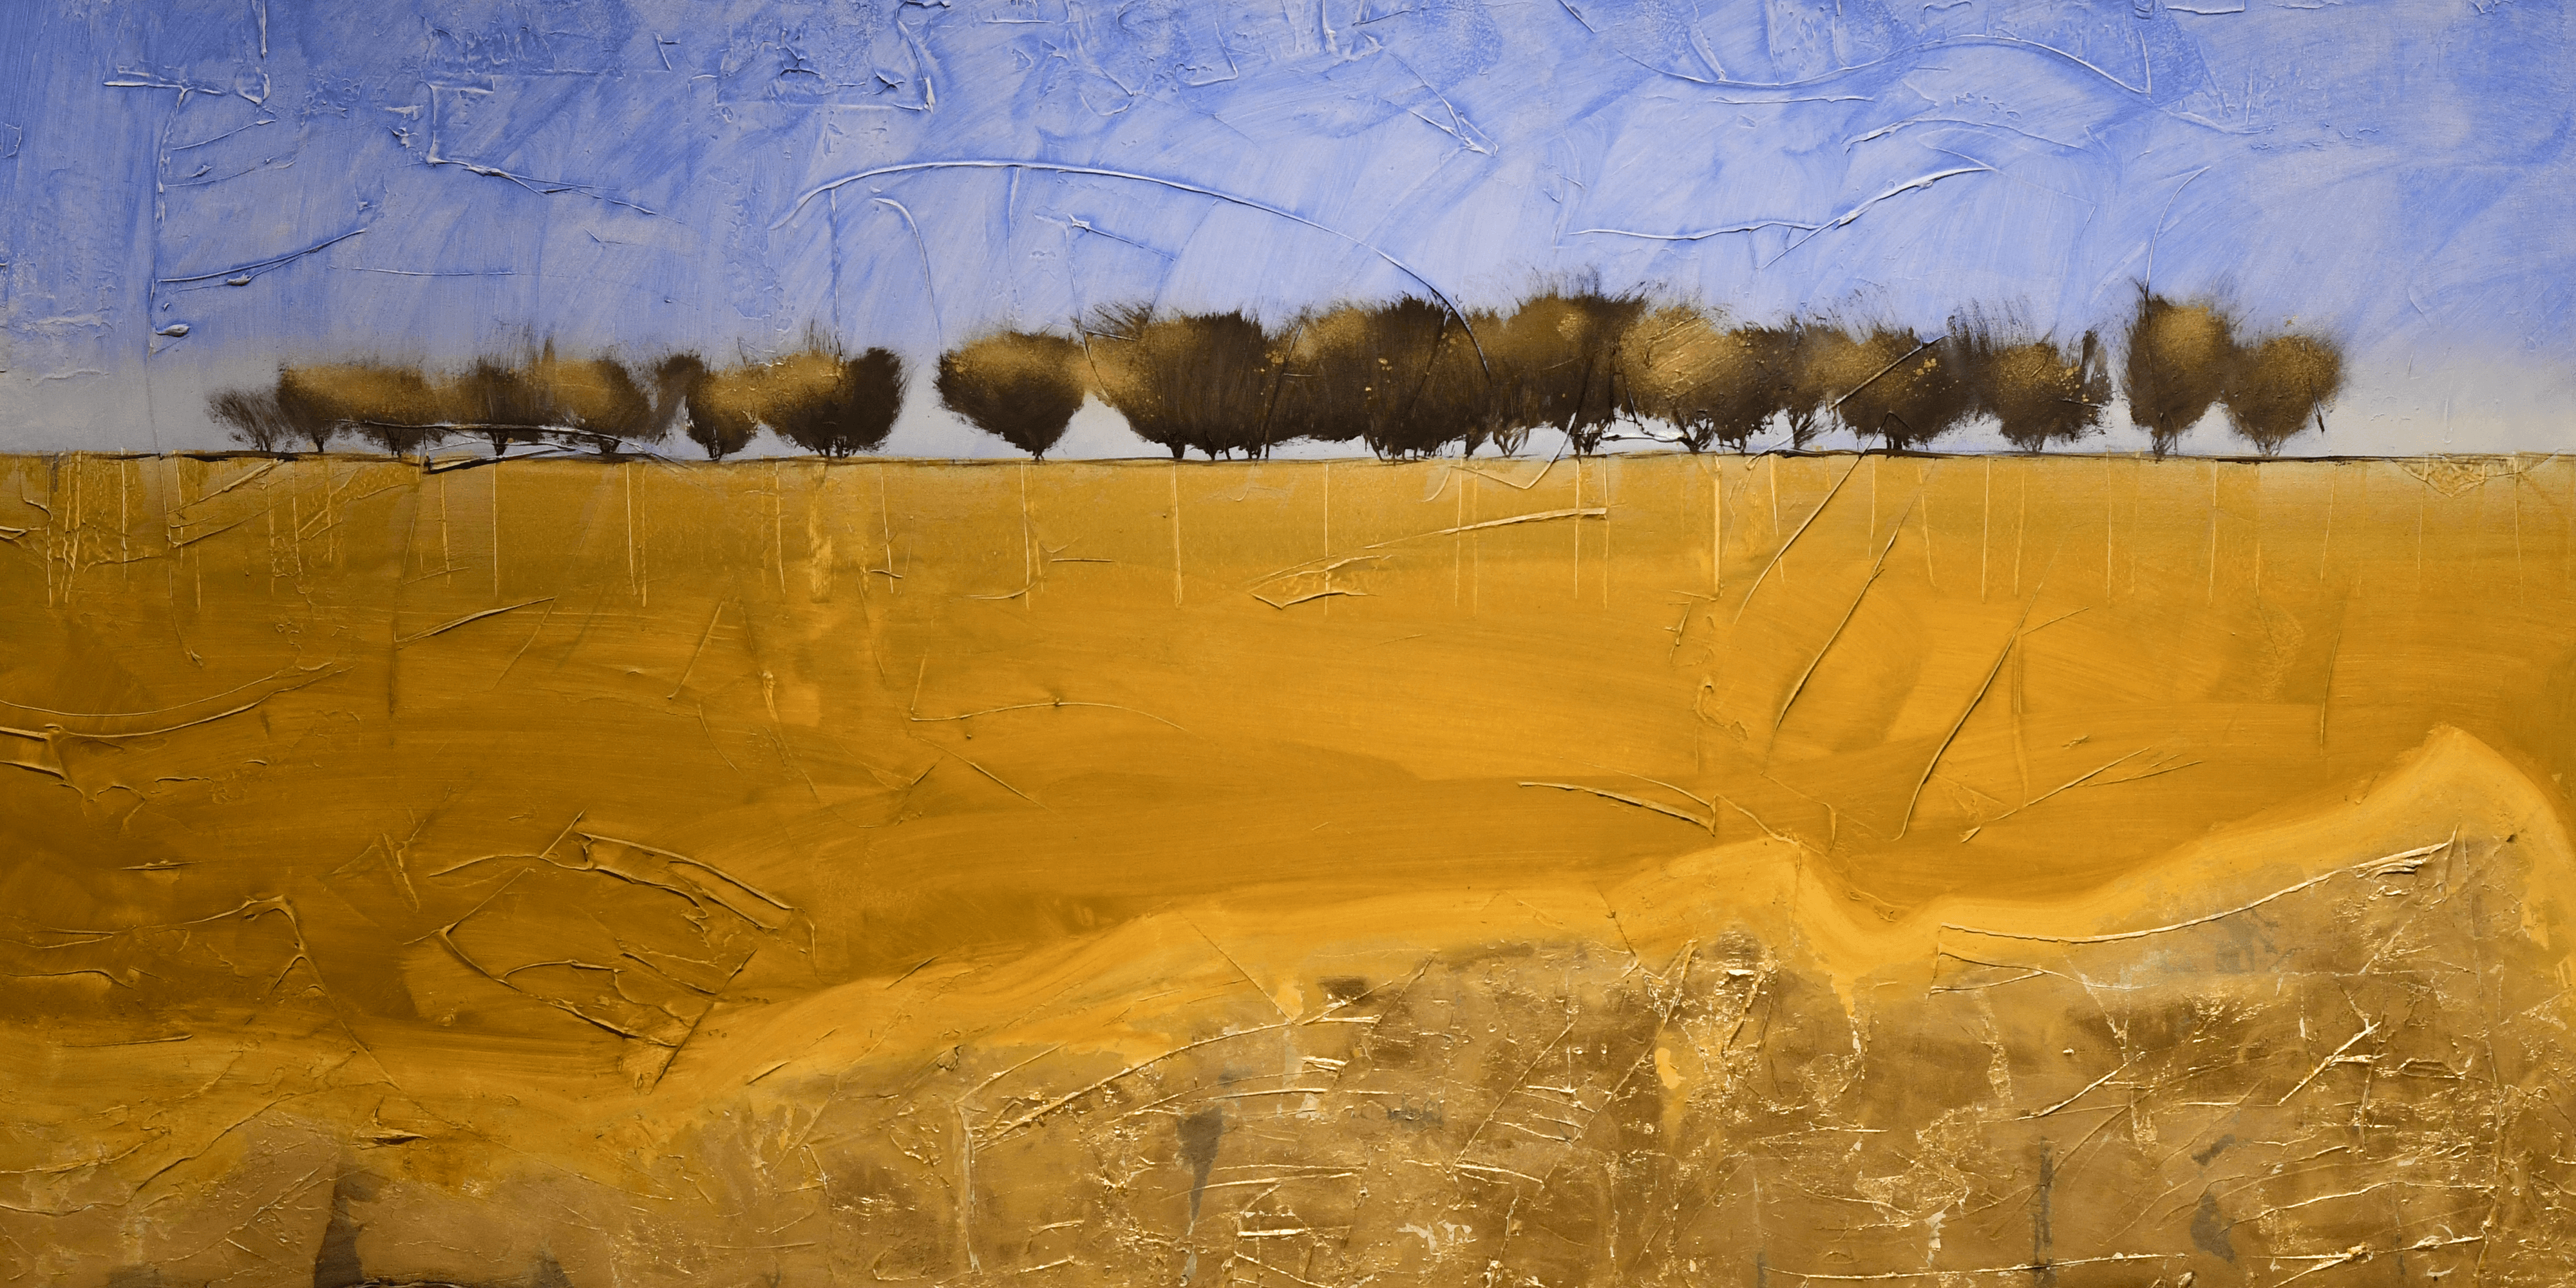 "Gold Land" 72"X36" mixed media on canvas with gold leaf, 2021